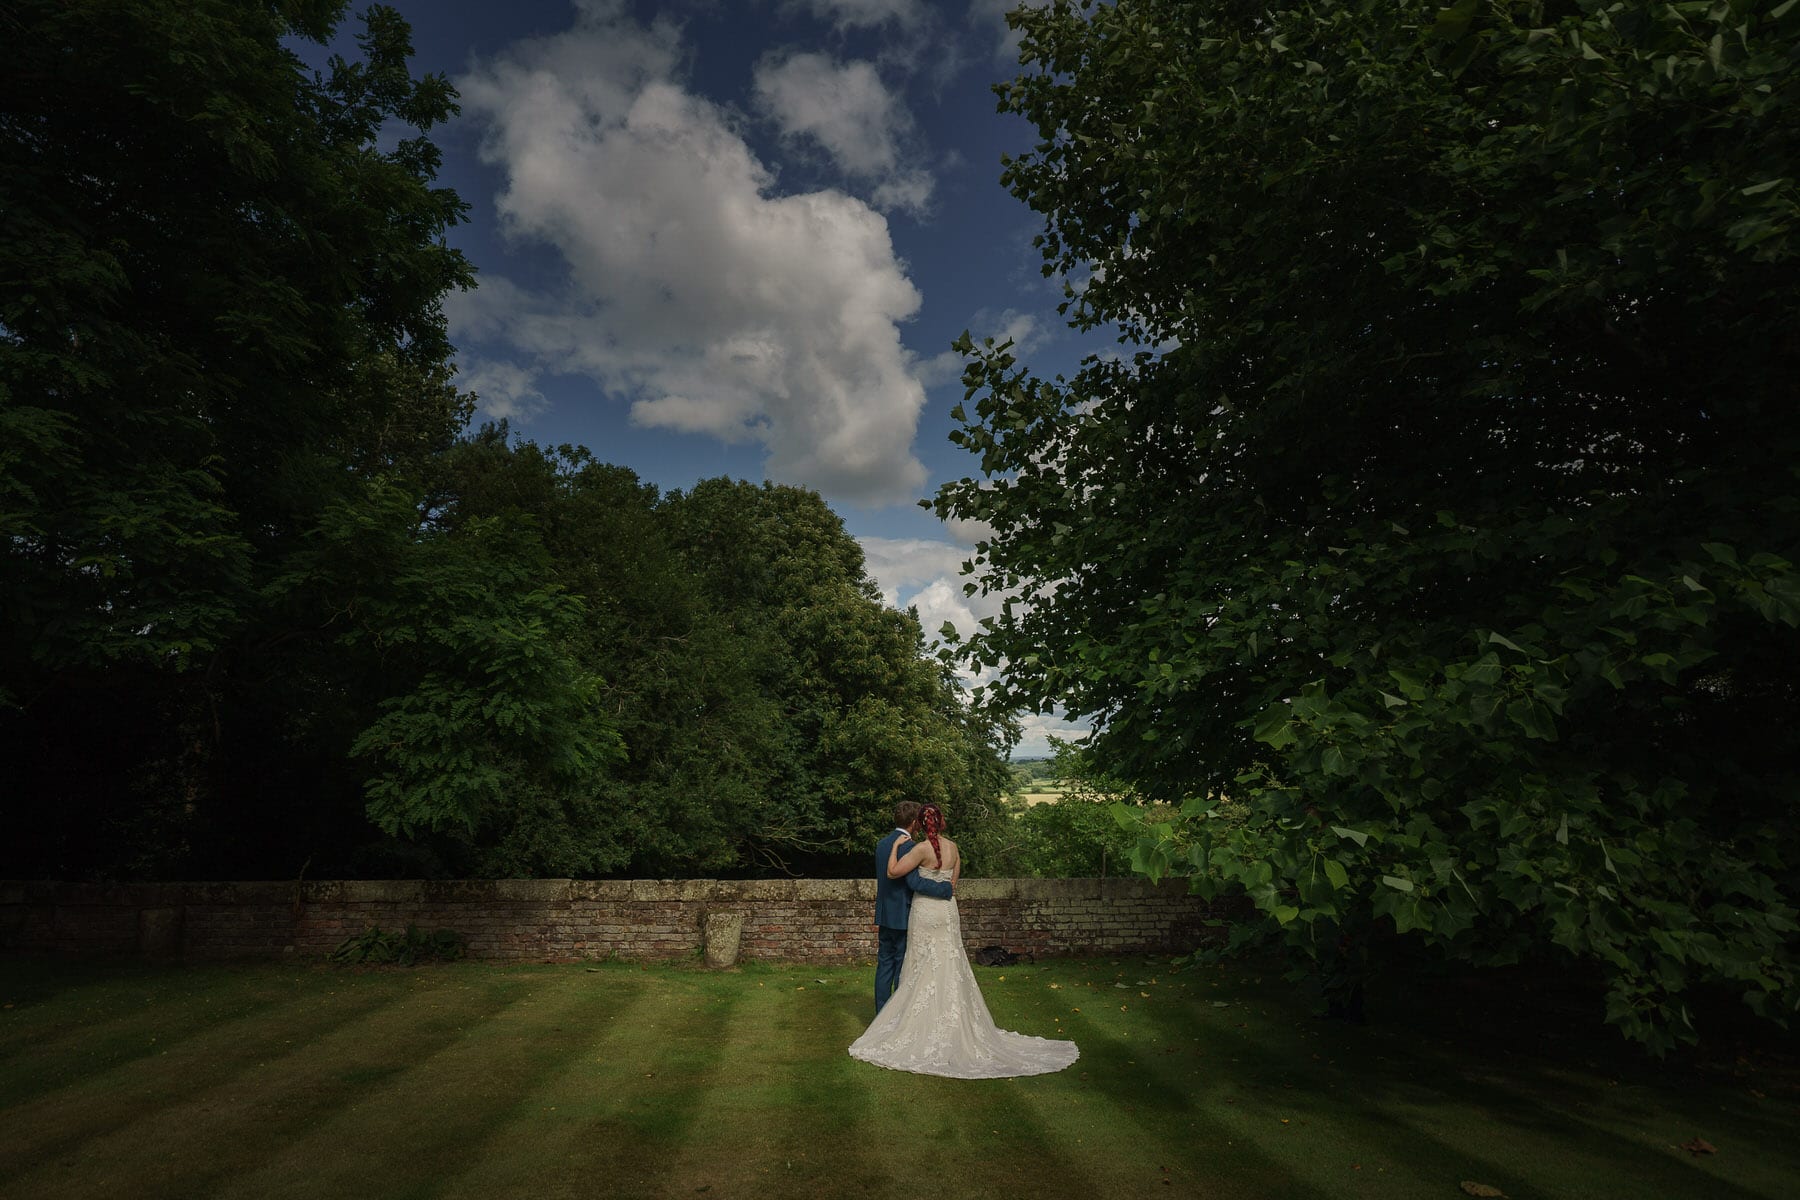 A bride and groom standing in the picturesque Pimhill Barn, Shropshire, under a cloudy sky.